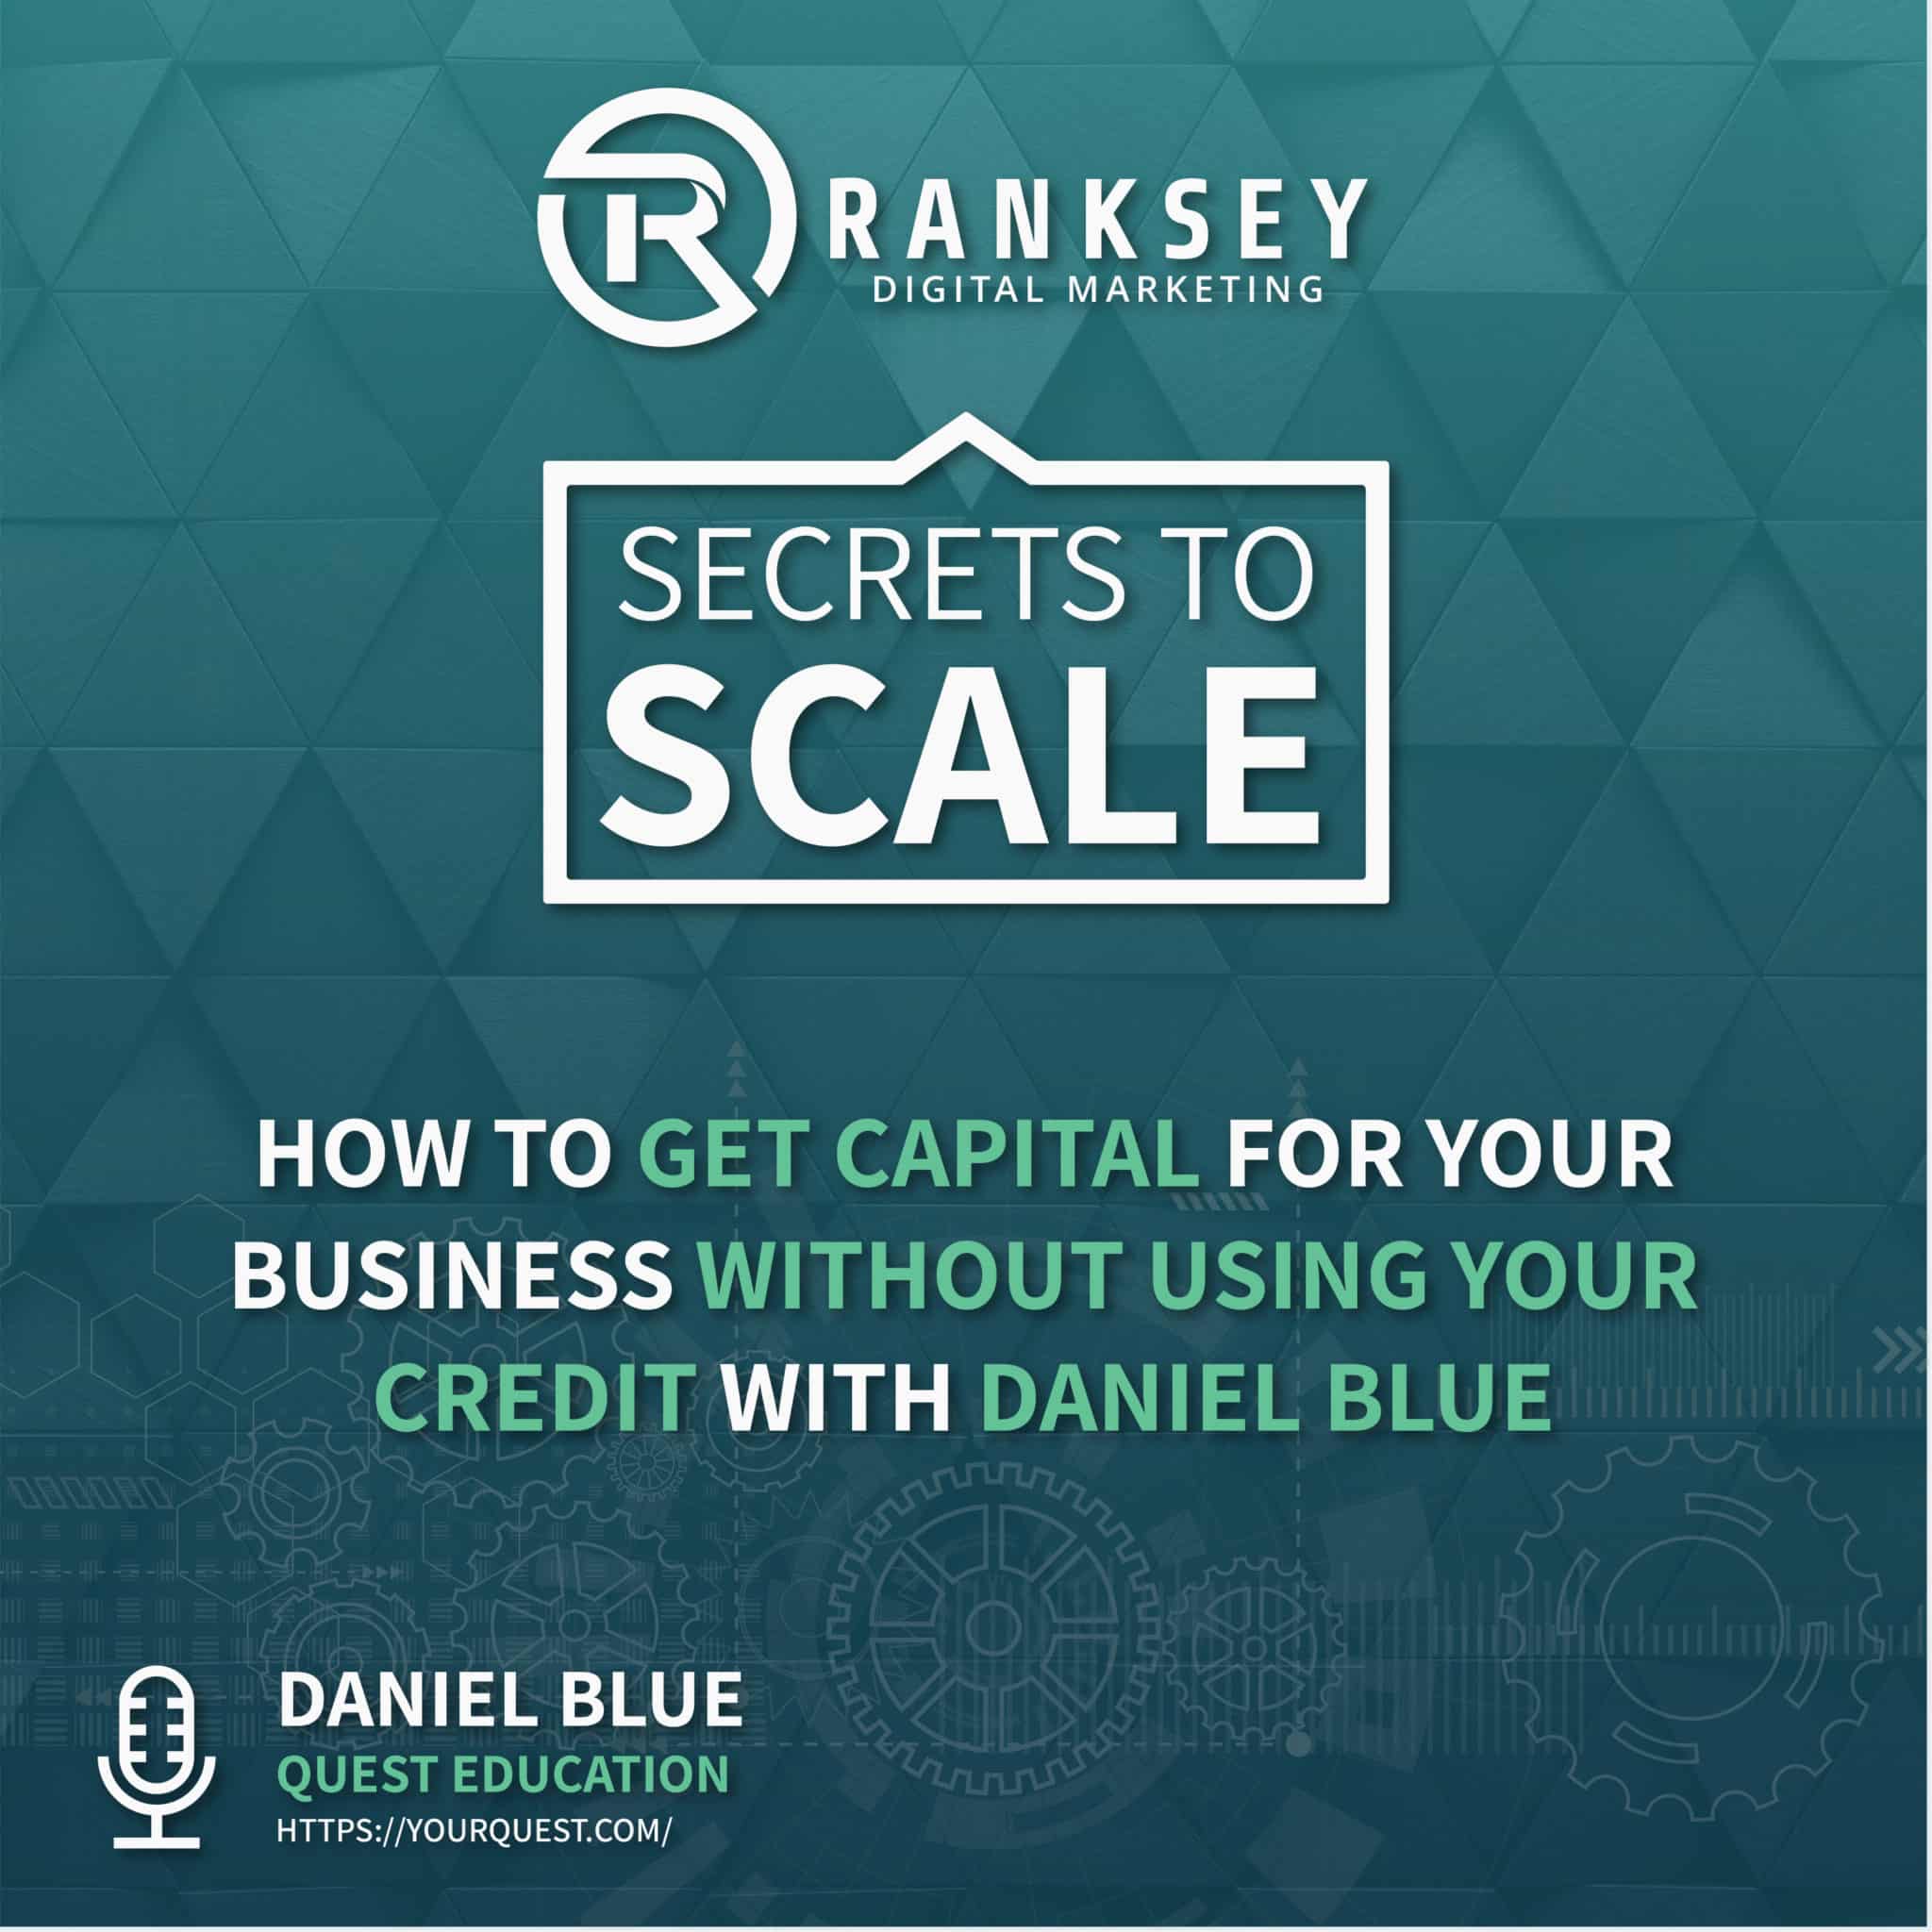 068 - How To Get Capital For Your Business Without Using Your Credit With Daniel Blue